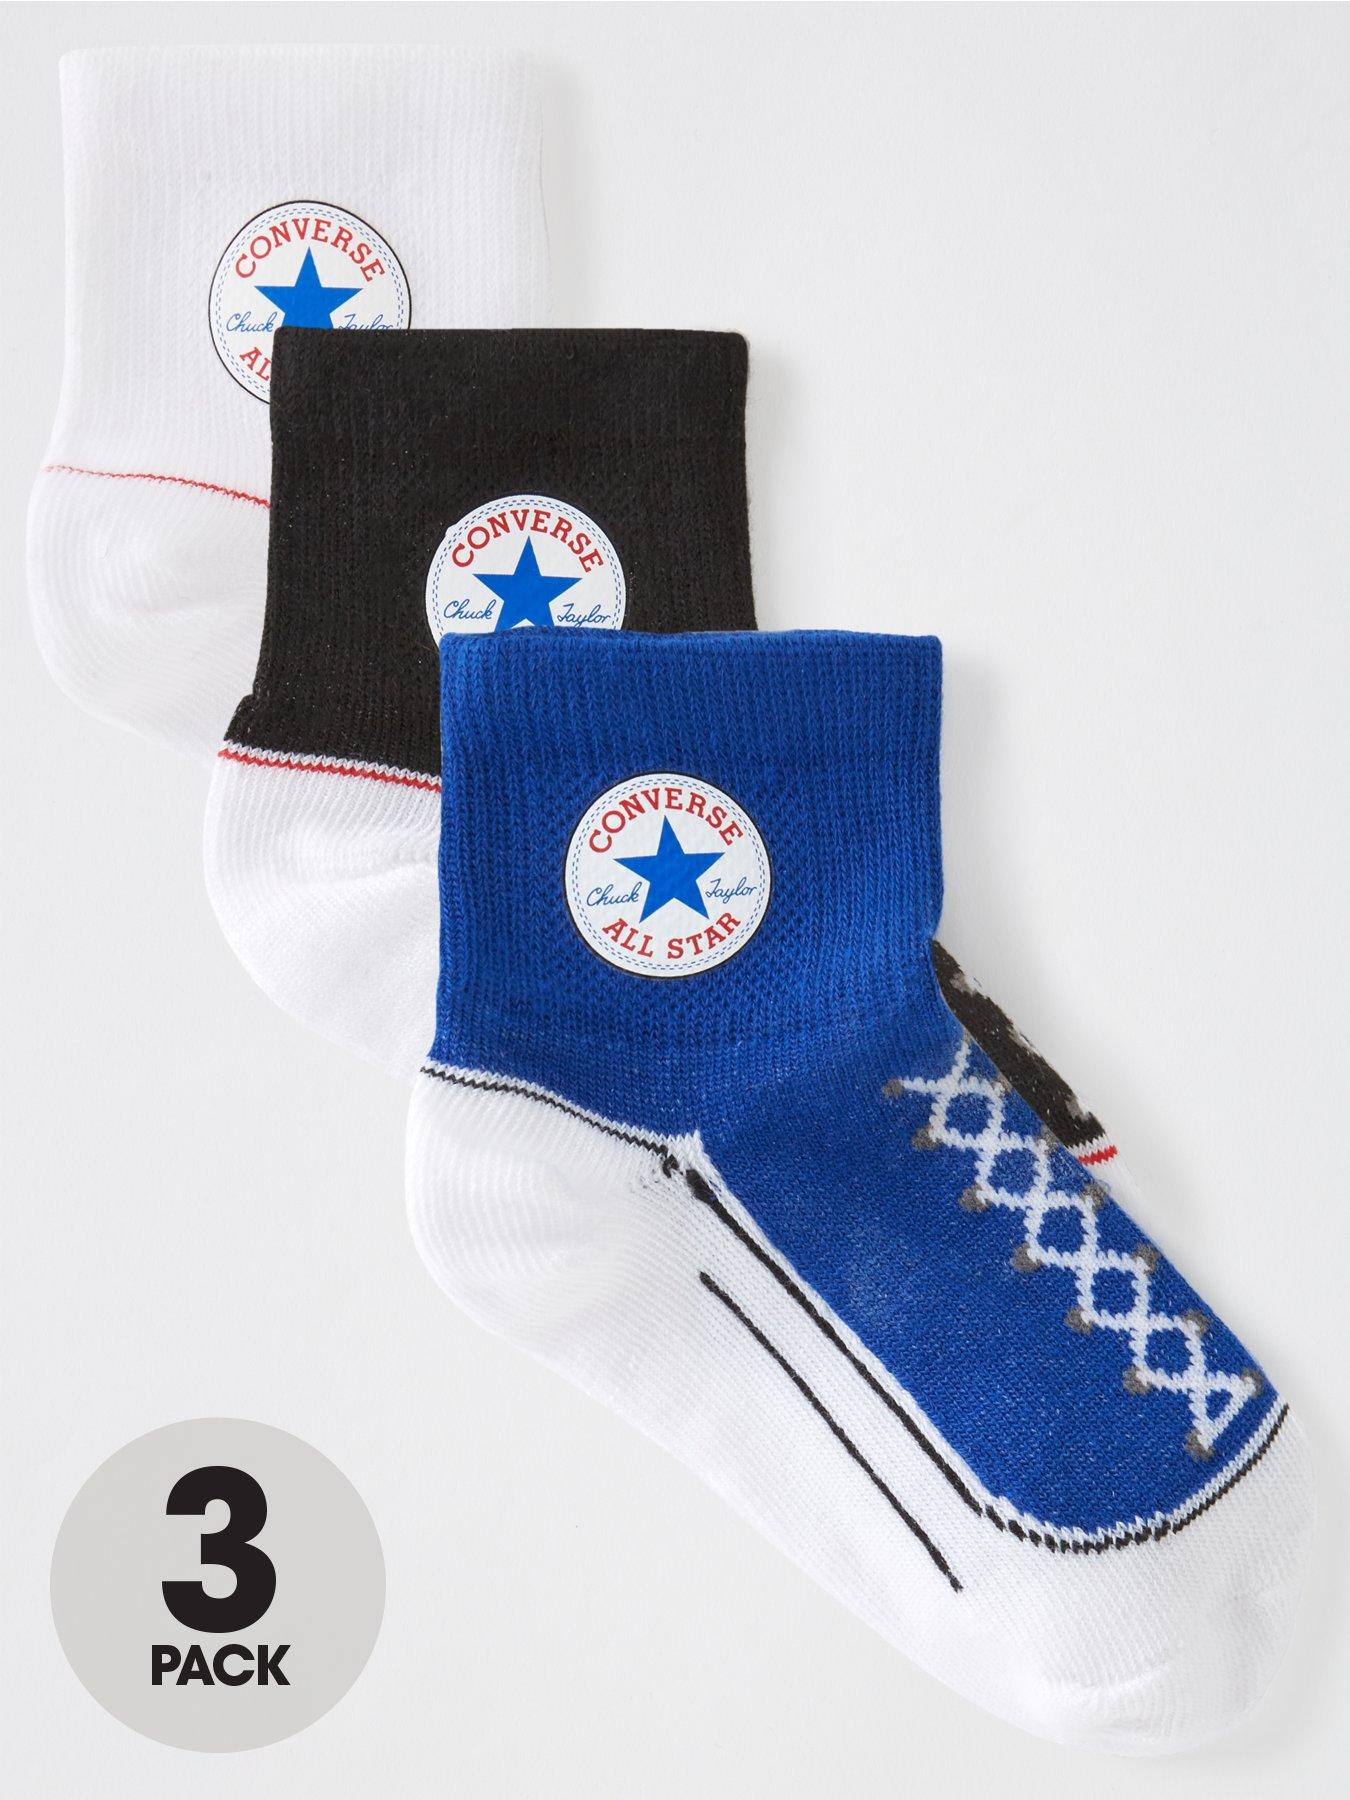 Infant choice of Younger Converse Chuck Toddler best is Blue Quarter - the for 3 one Socks Pack